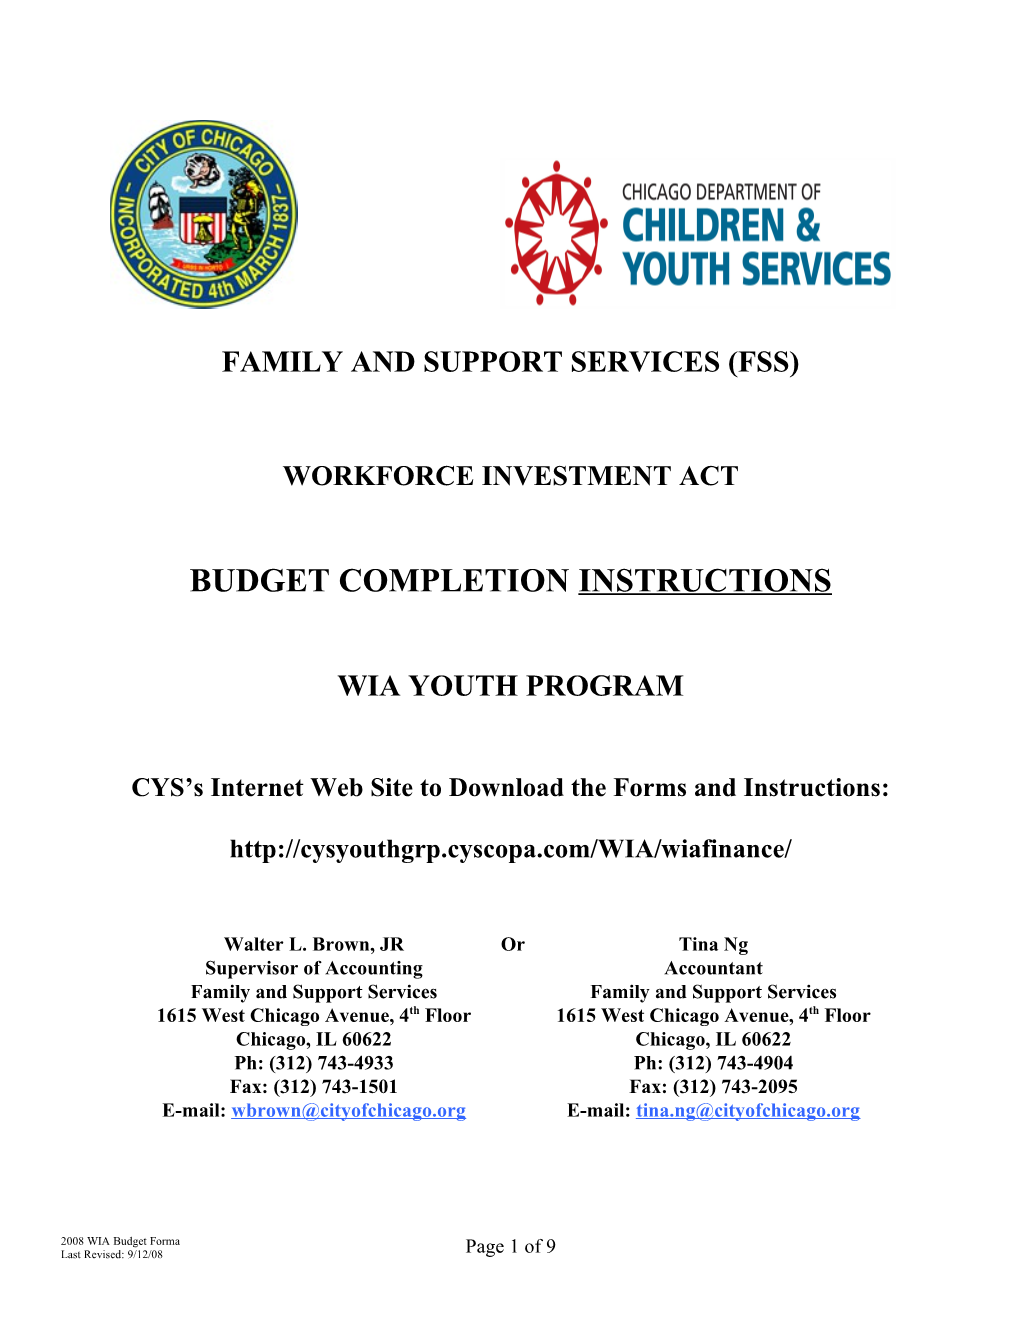 Family and Support Services (Fss)